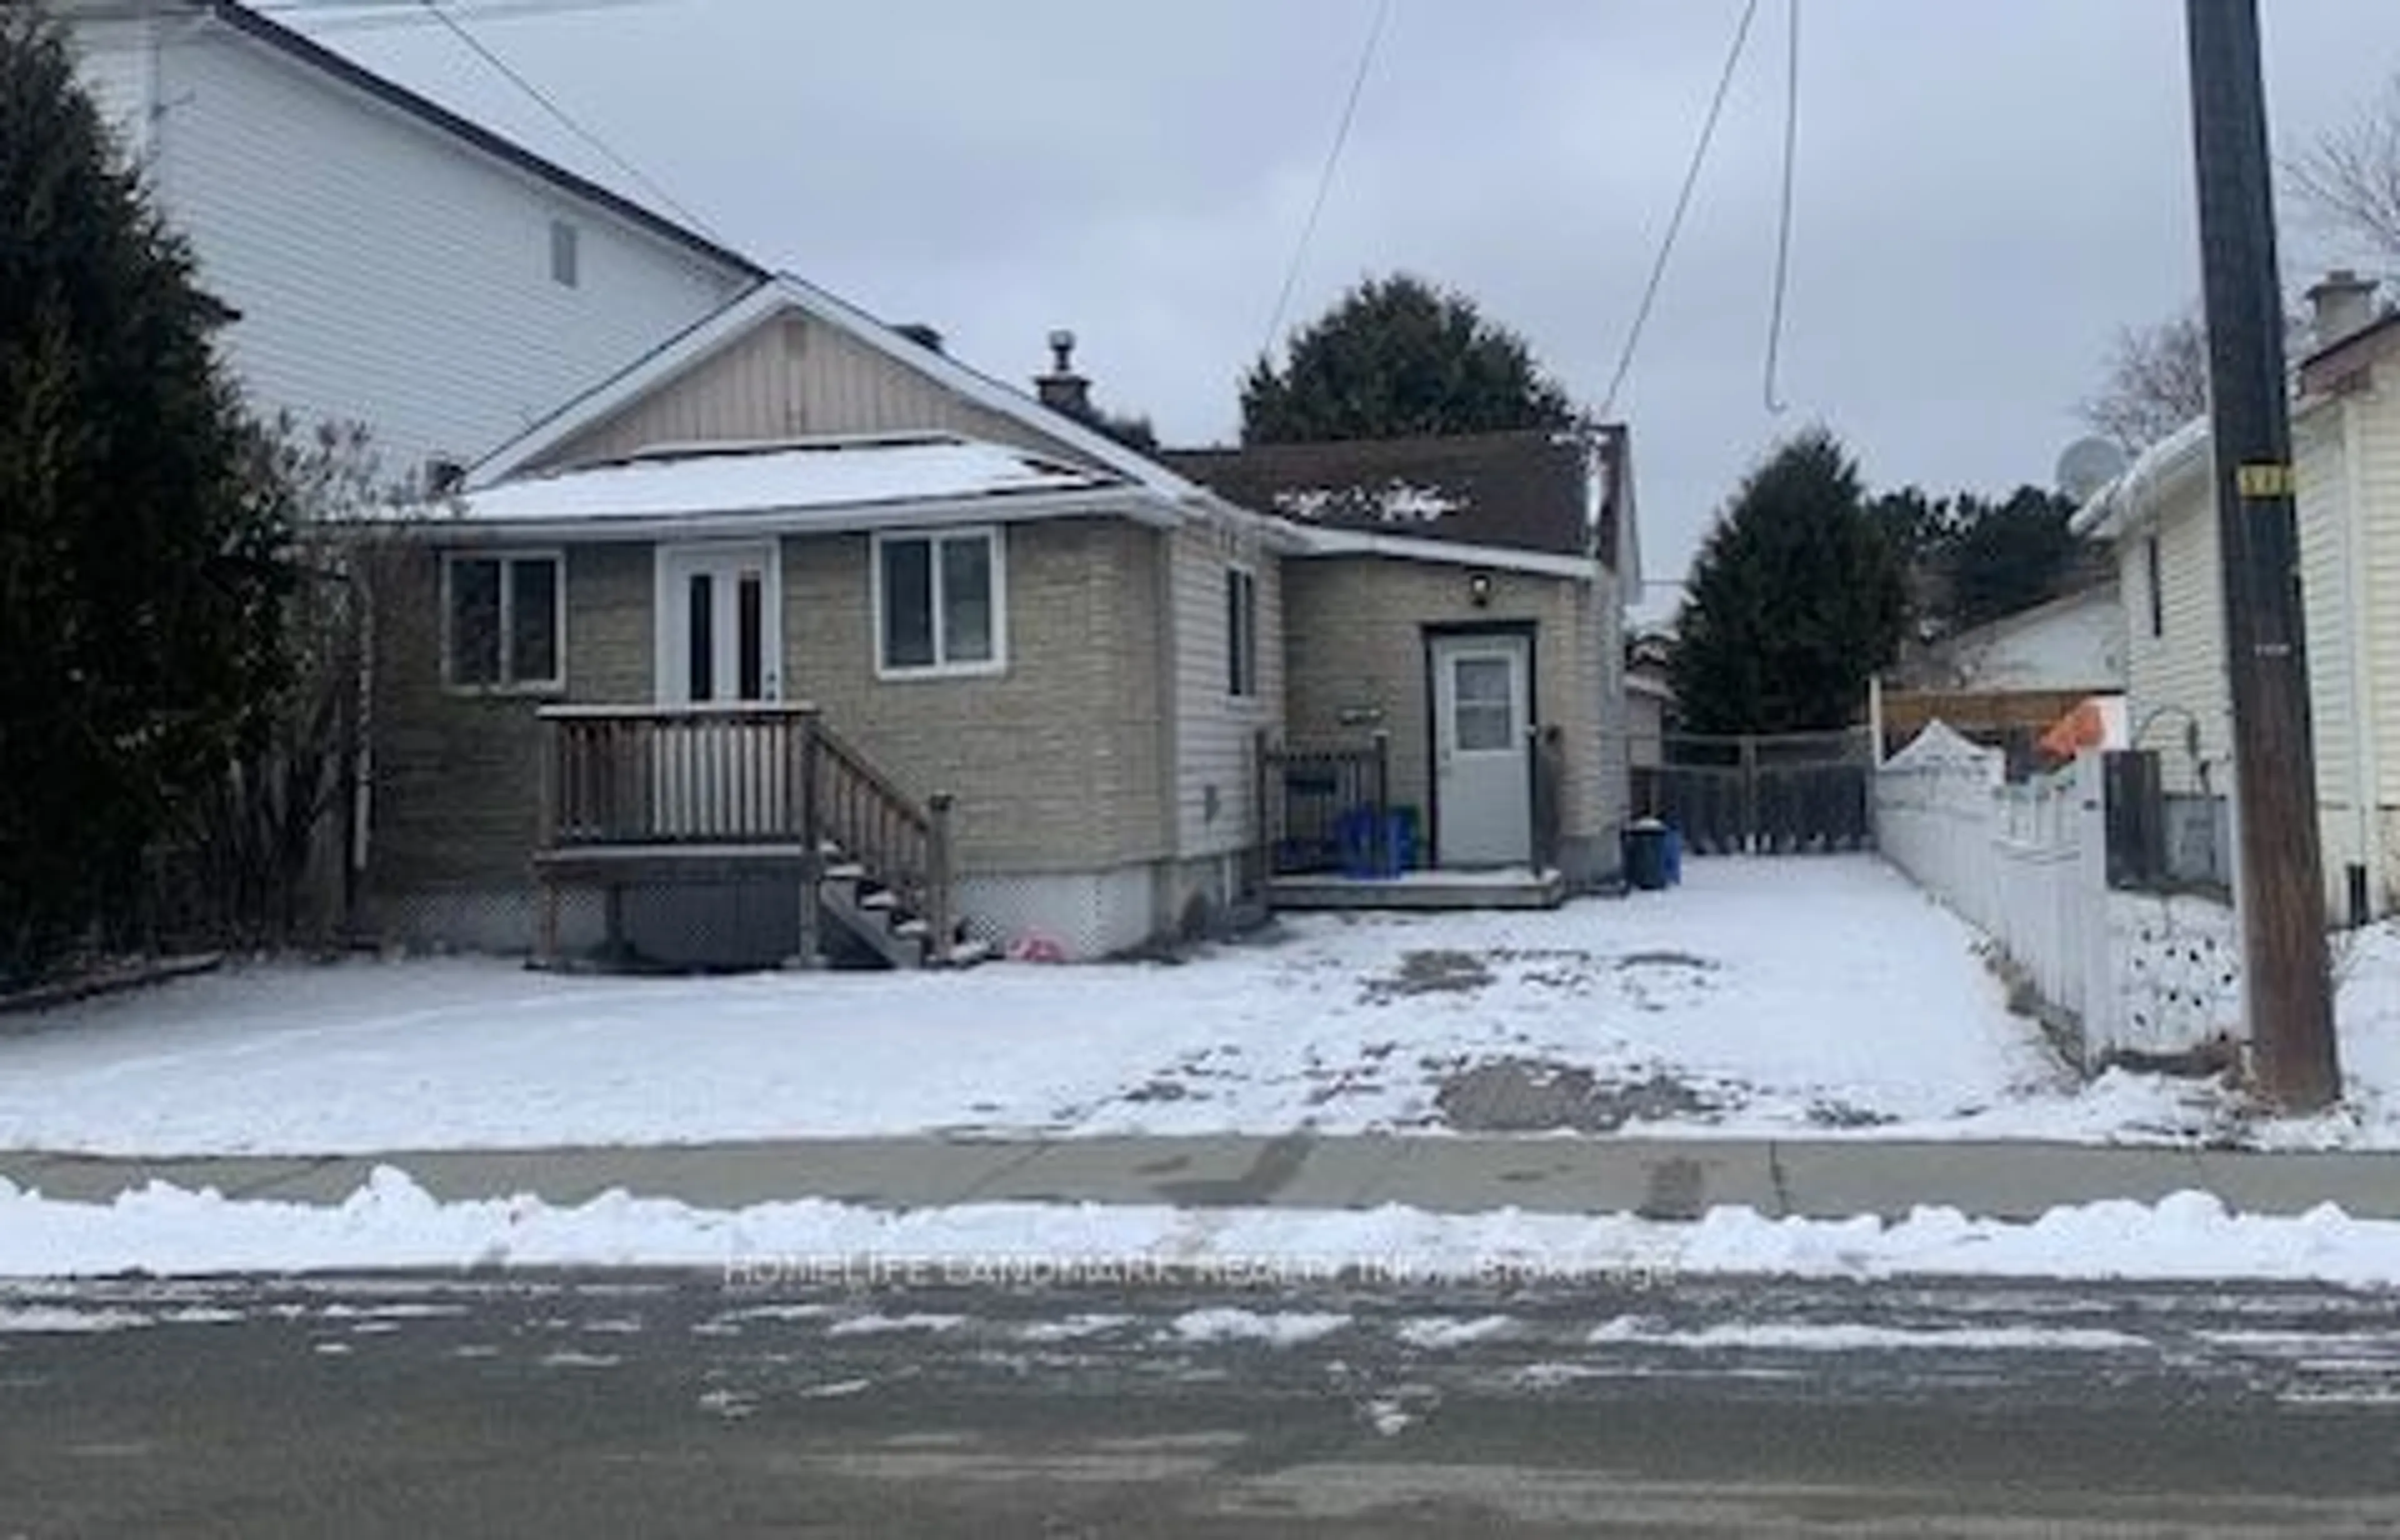 Home with unknown exterior material for 400 St. George St, Greater Sudbury Ontario P3B 2L6